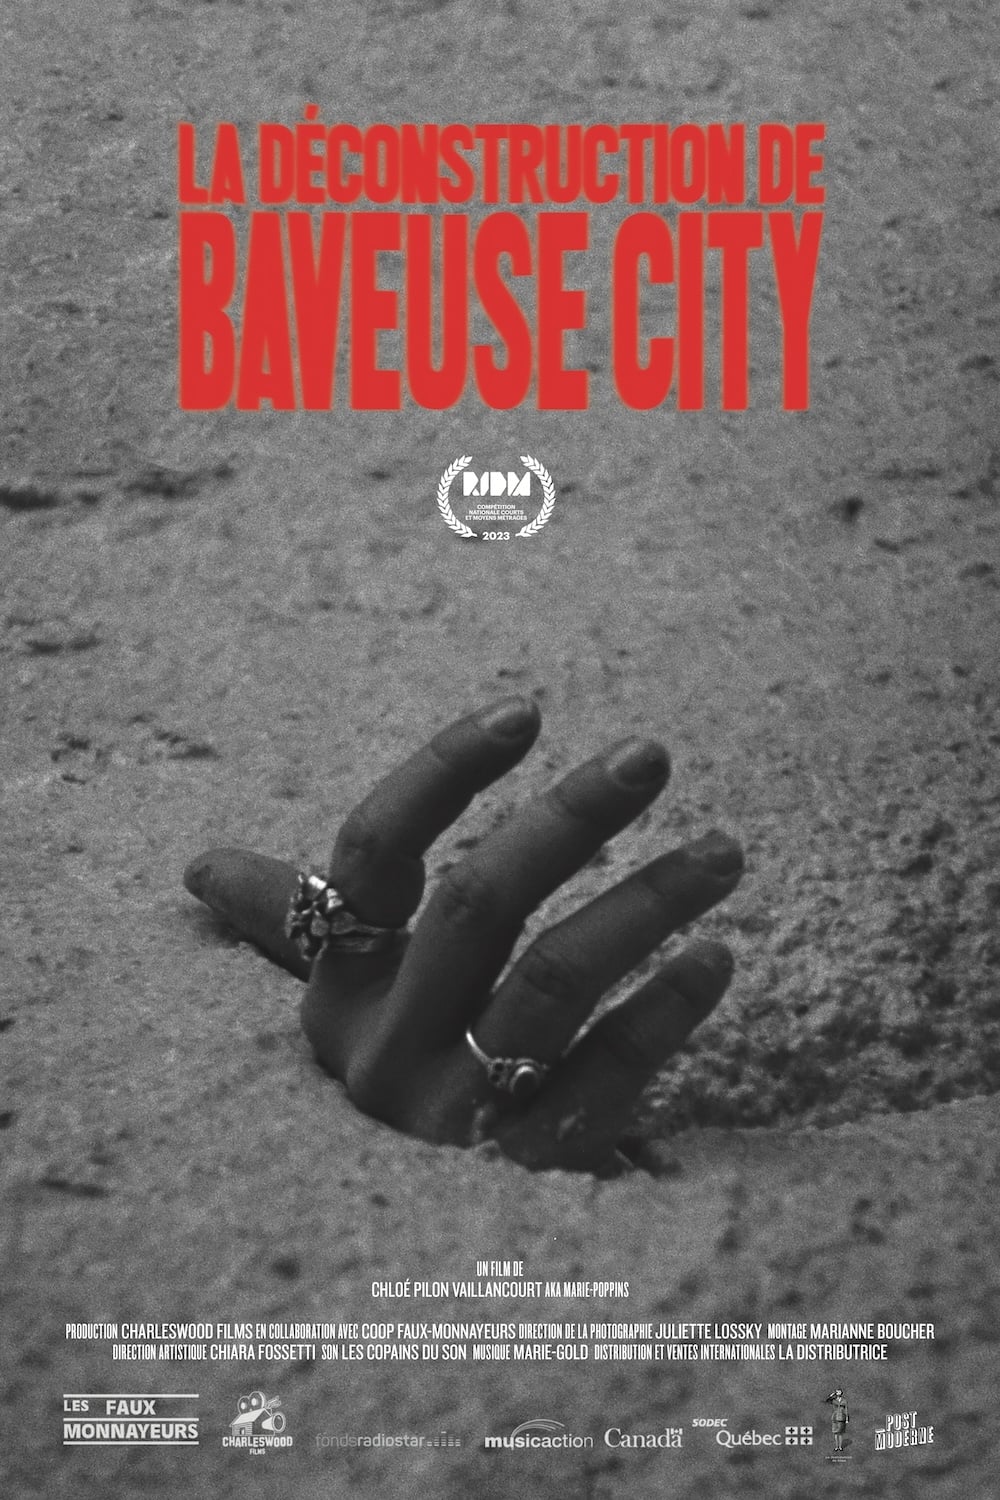 The Dismantling of Baveuse City